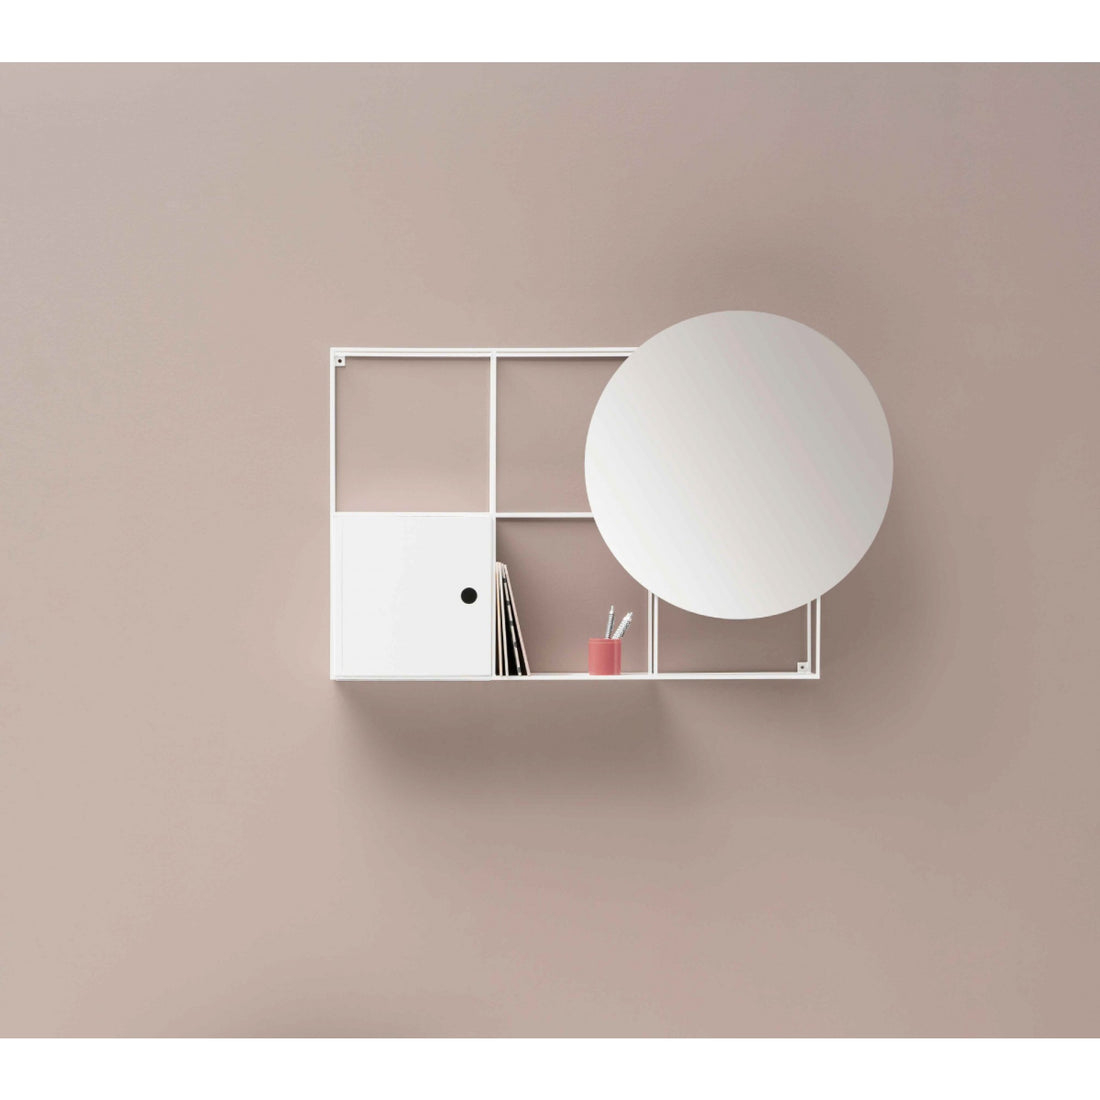 Ex.t FELT - Wall mounted modular system - Composition 2 - White